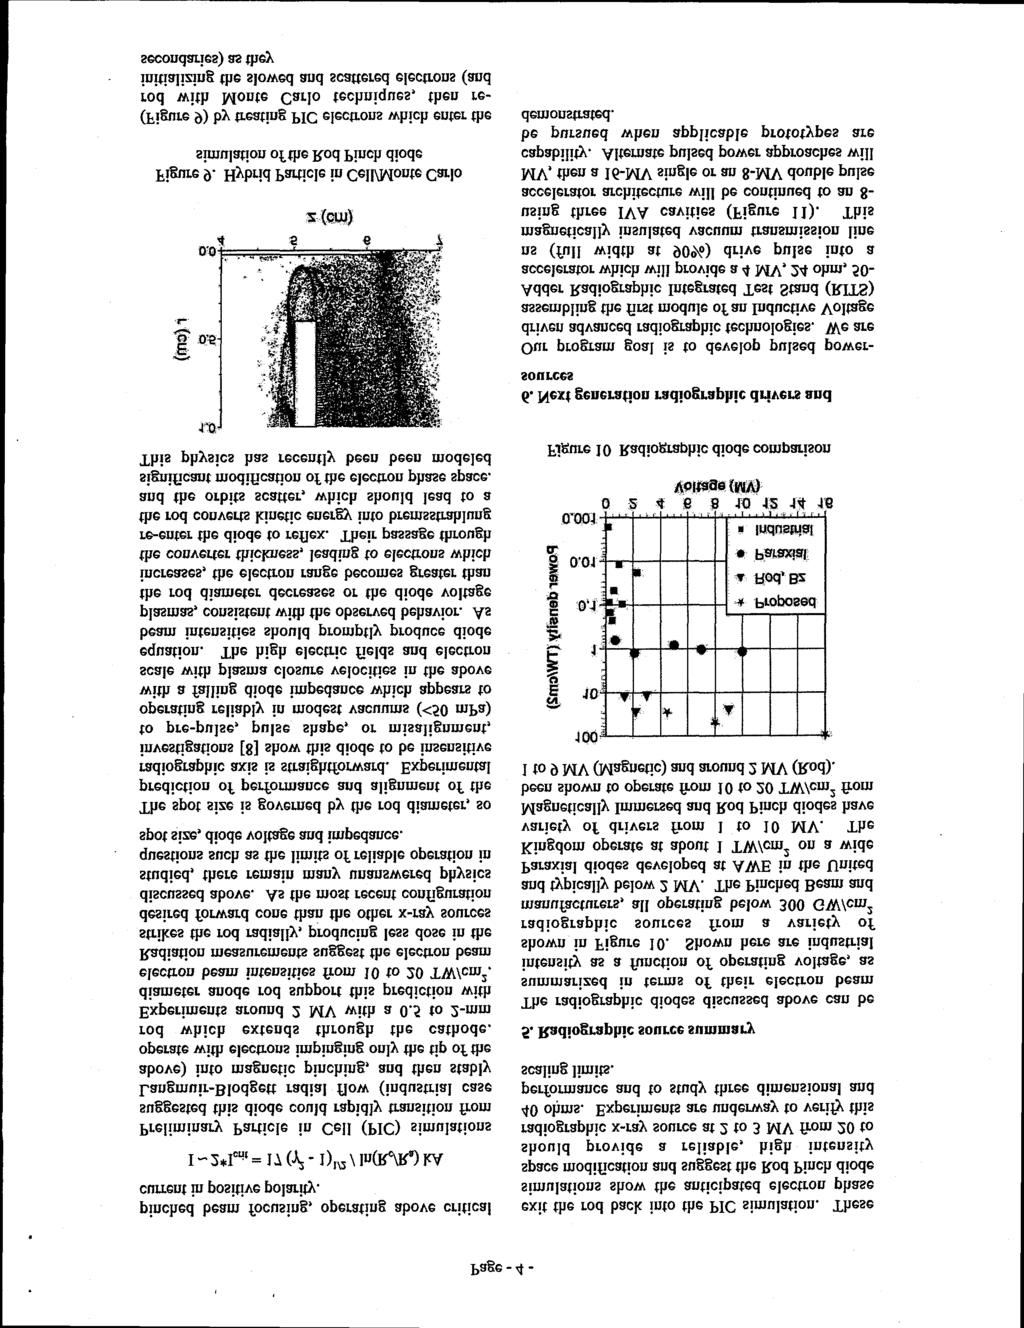 Page -4- pinched beam focusing, operating above critical current in positive polarity.